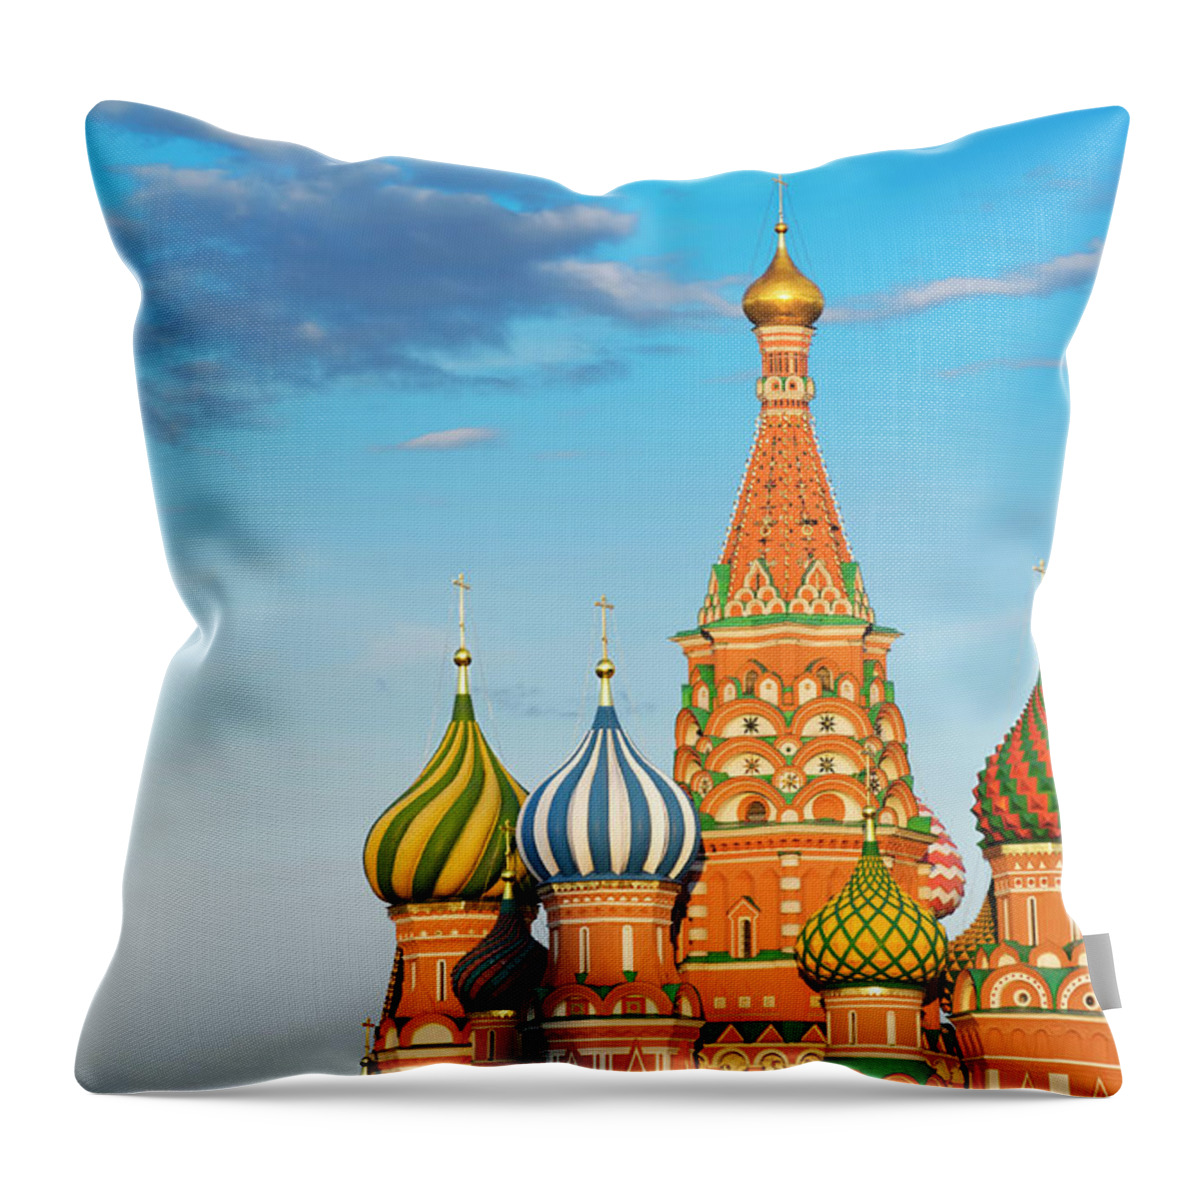 Built Structure Throw Pillow featuring the photograph St Basils Cathedral On Red Square In by Anddraw